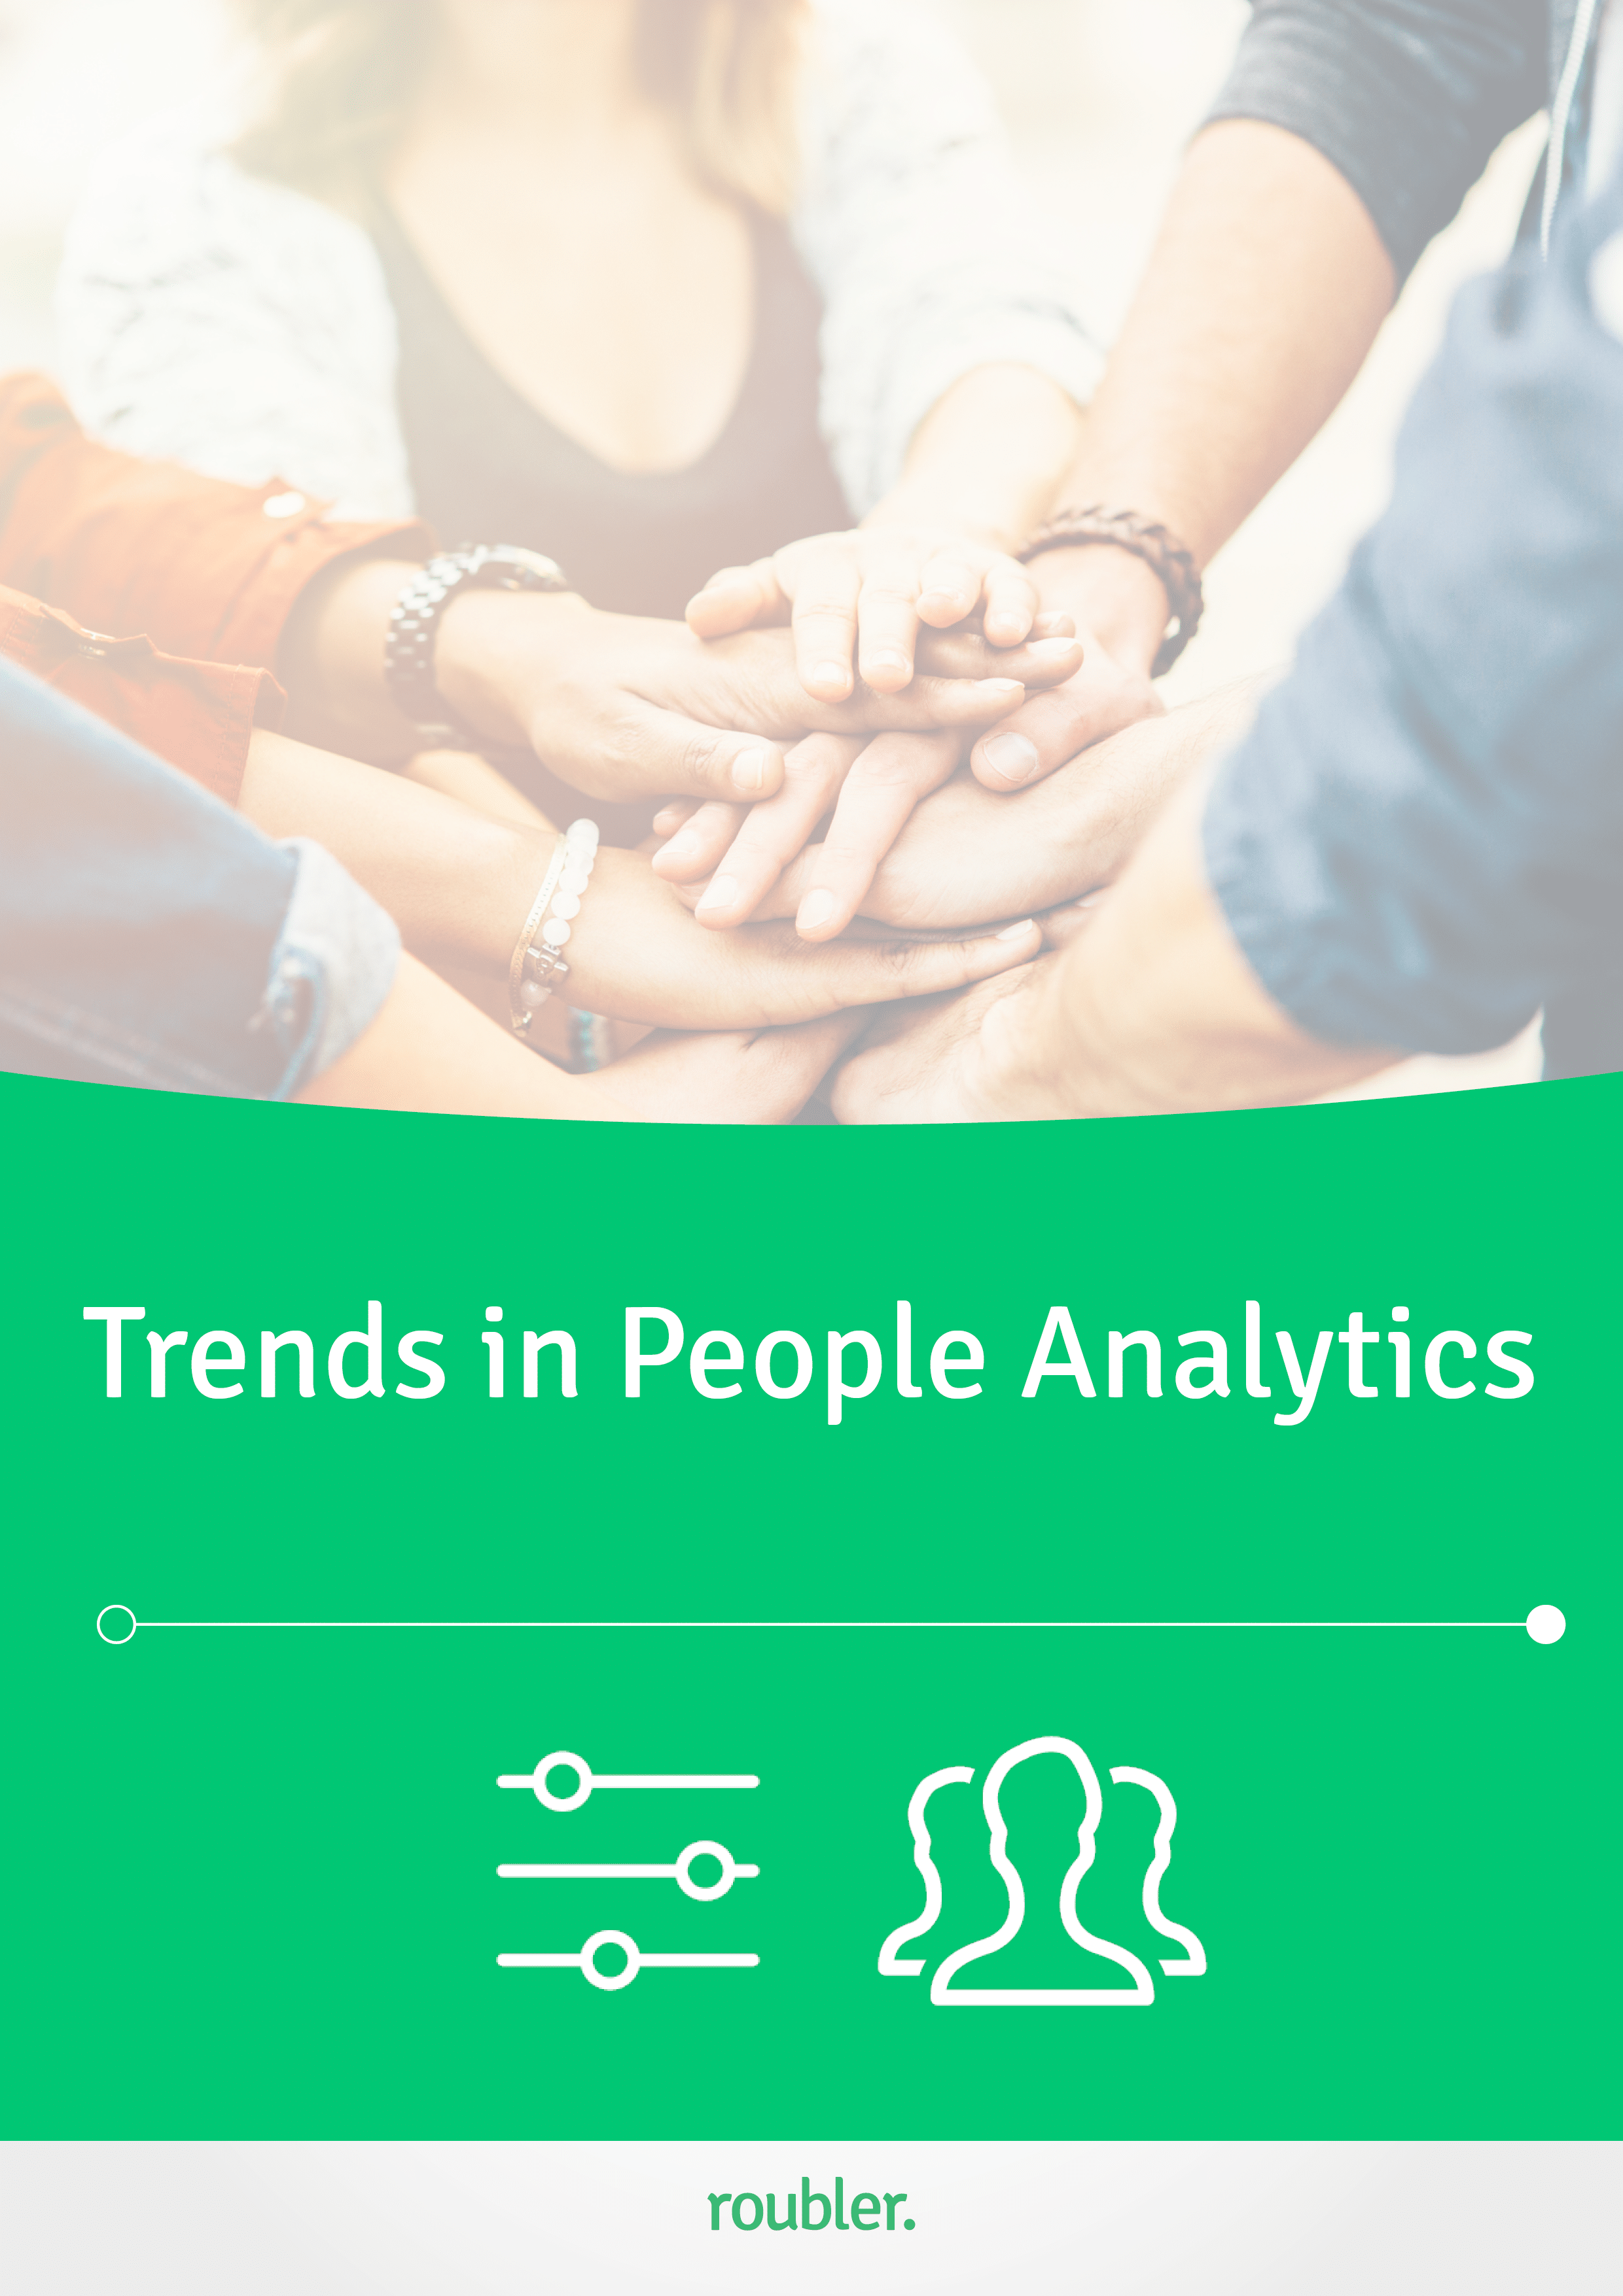 Trends in People Analytics